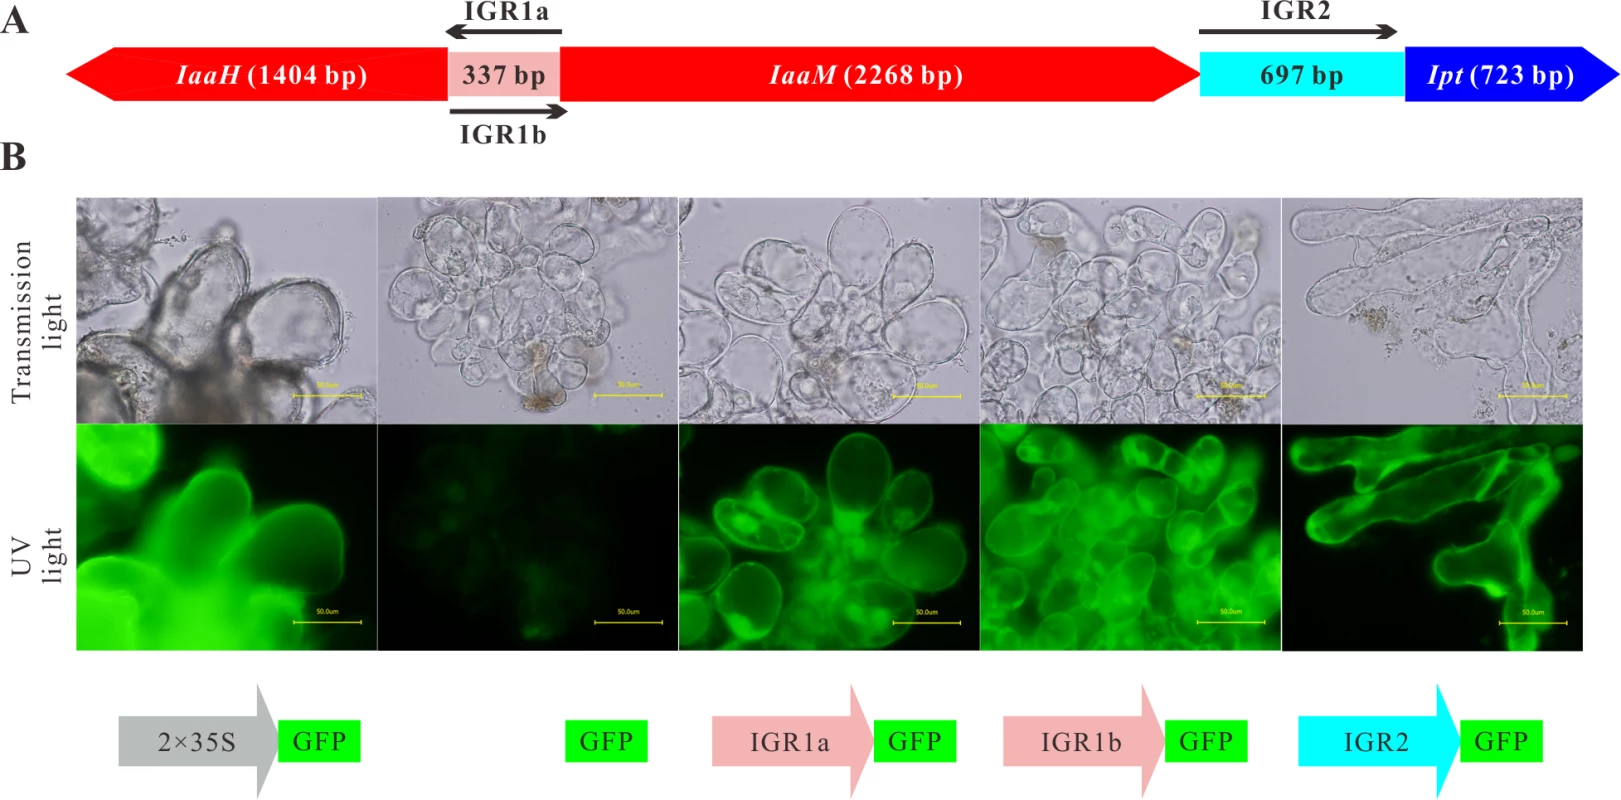 IGR1 and IGR2 function as promoters in <i>Arabidopsis</i> cells.